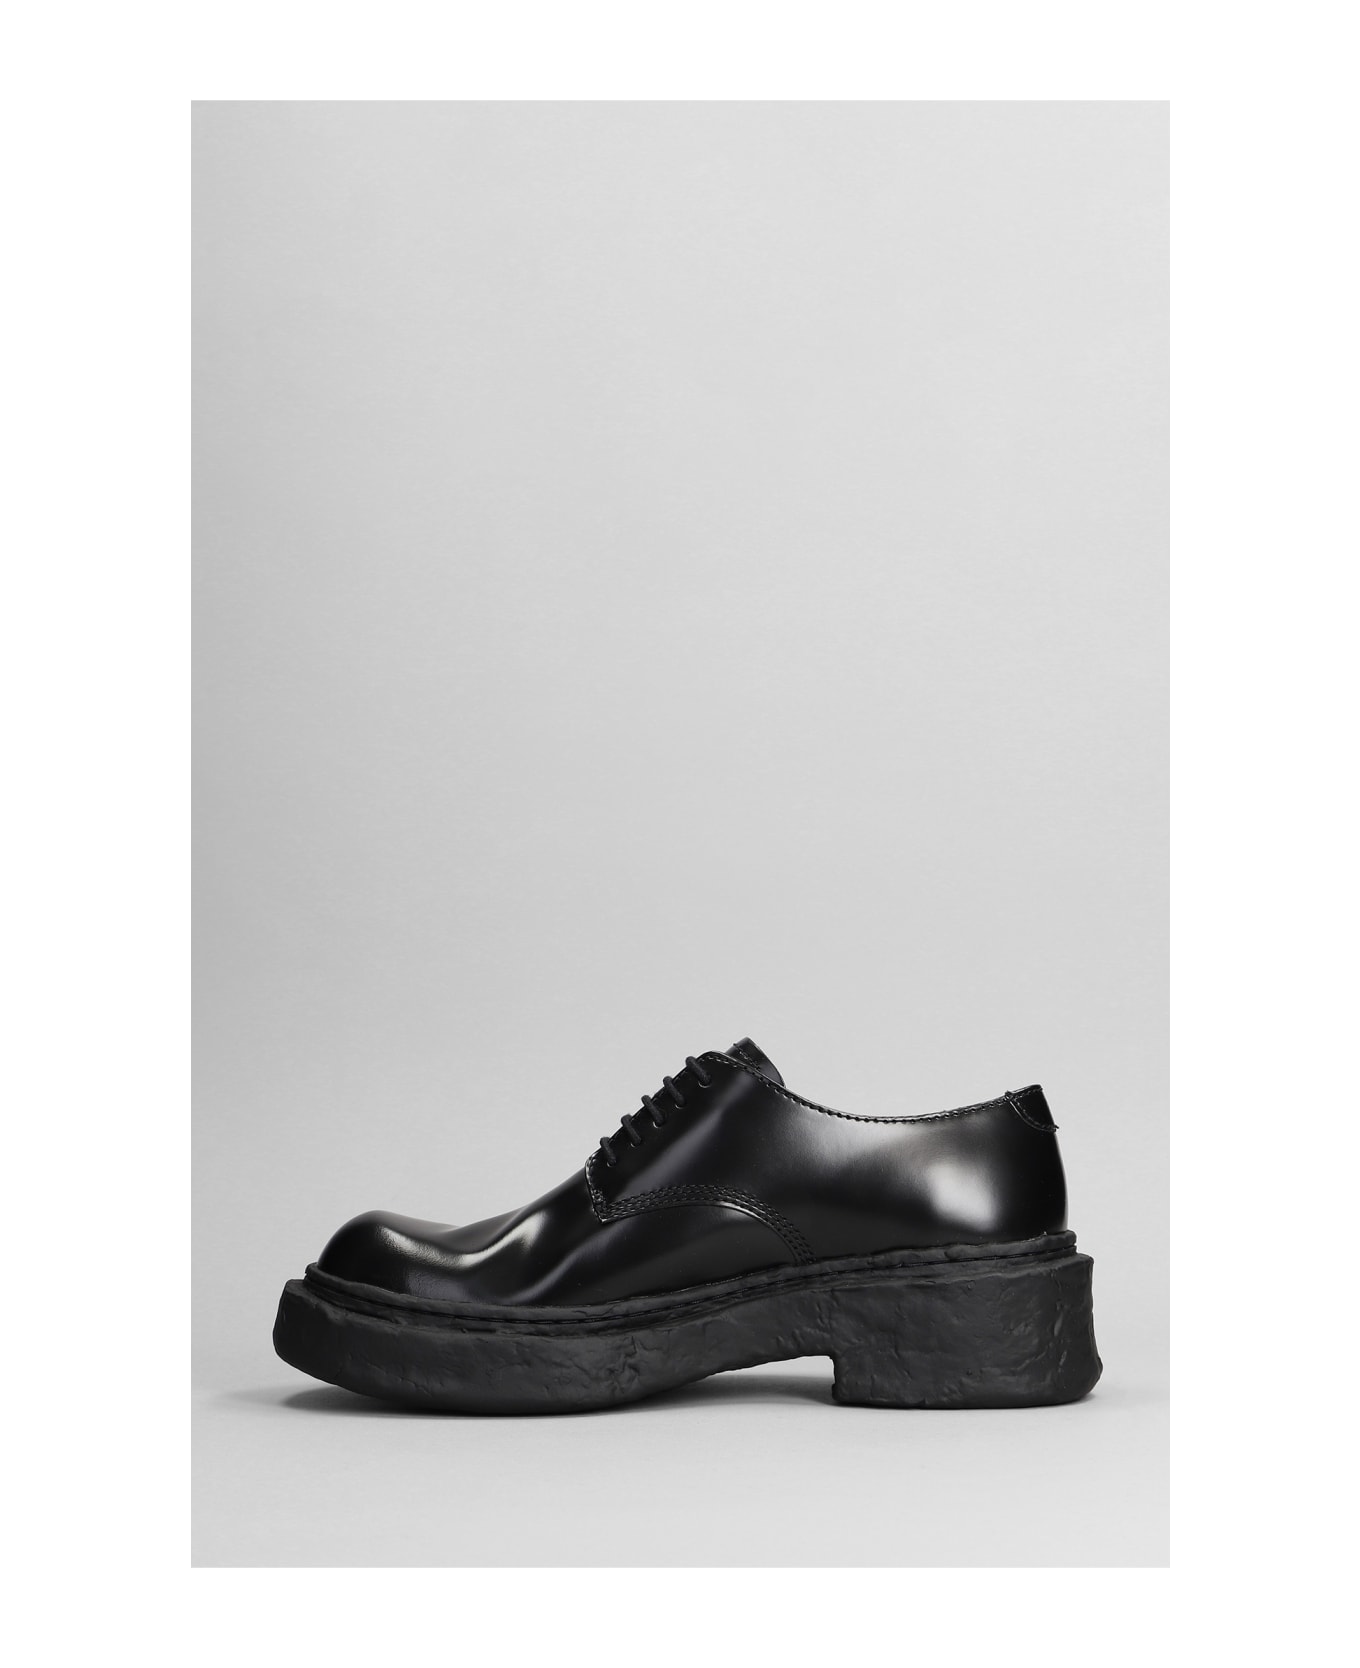 Camper Vamonos Lace Up Shoes In Black Leather - black レースアップシューズ